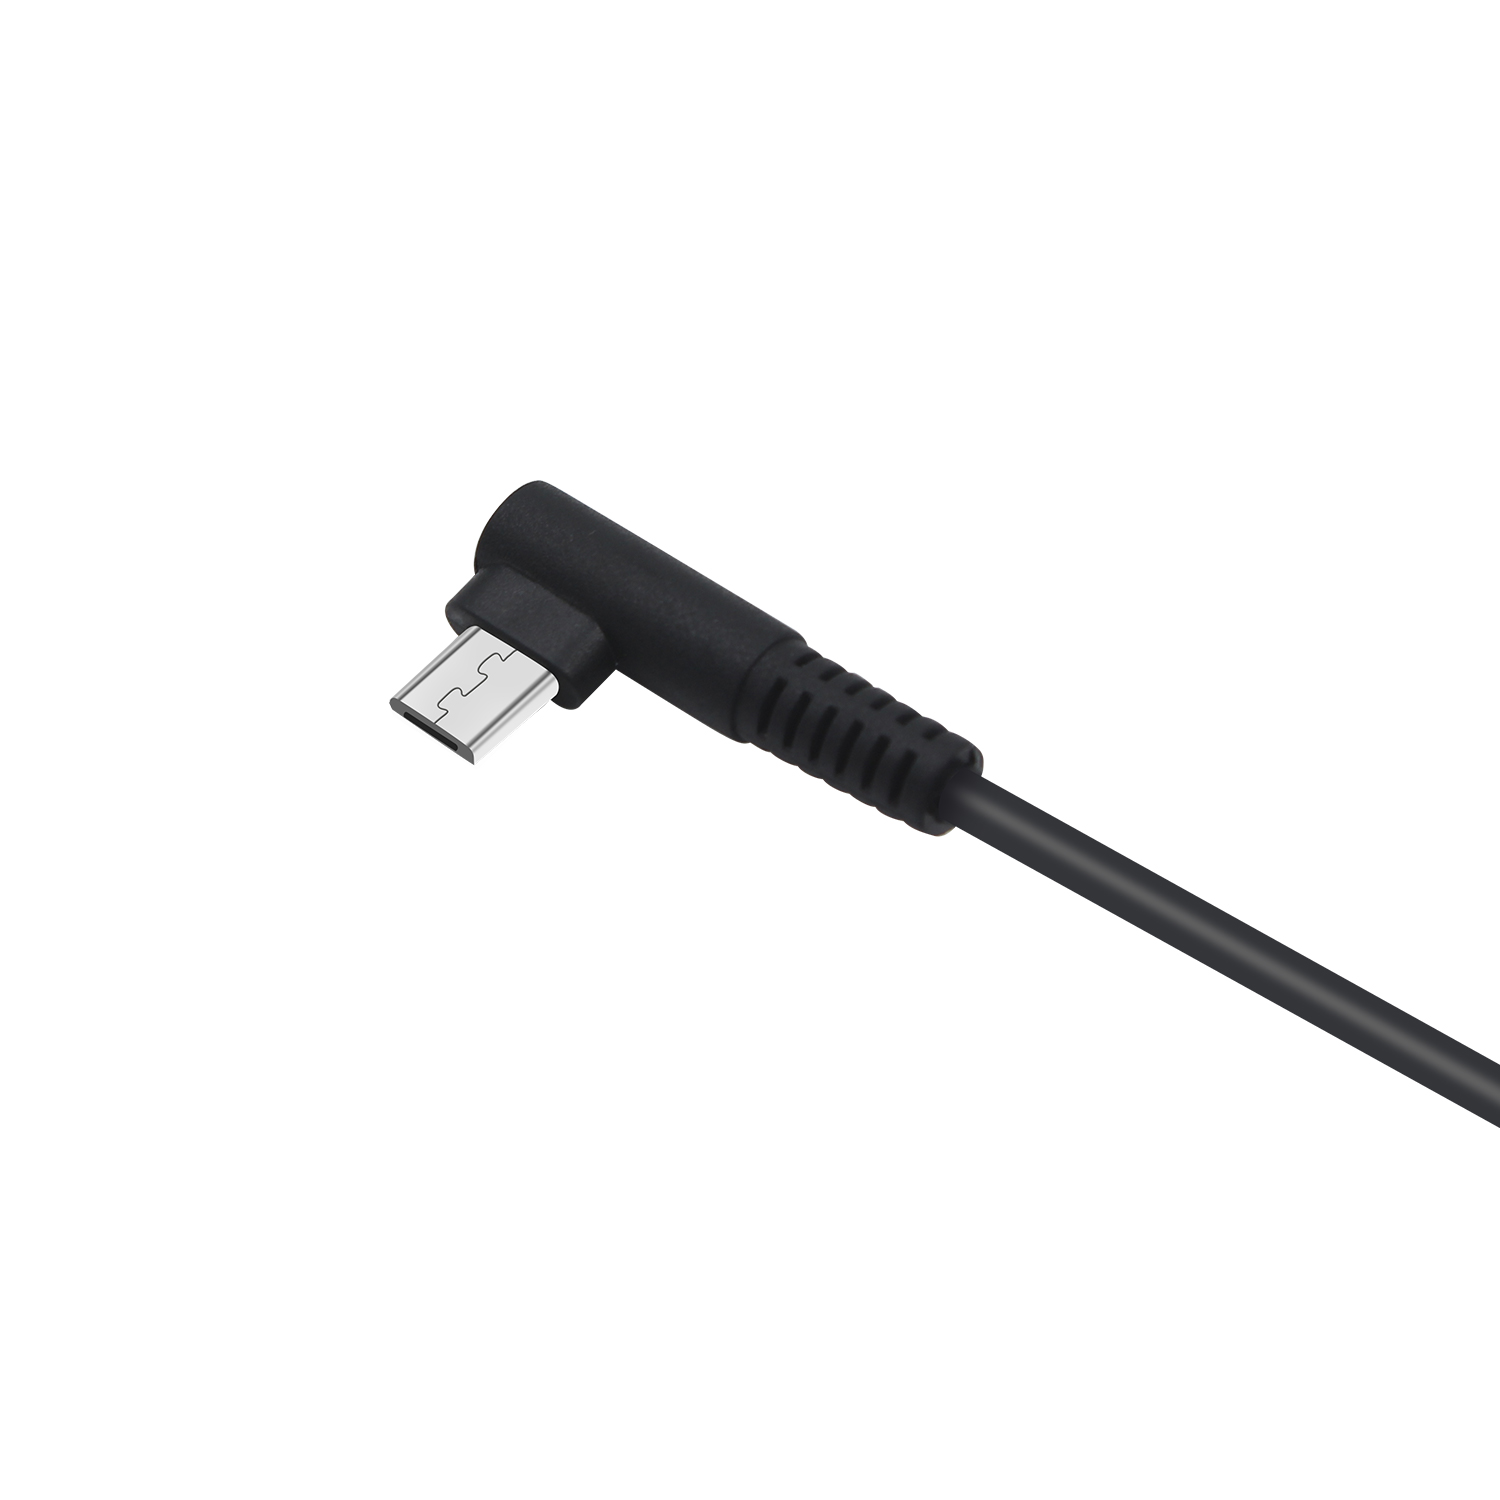 Praktisch Collectief smaak Huion Micro USB Cable for Pen Tablet | Huion Official Store: Drawing  Tablets, Pen Tablets, Pen Display, Led Light Pad